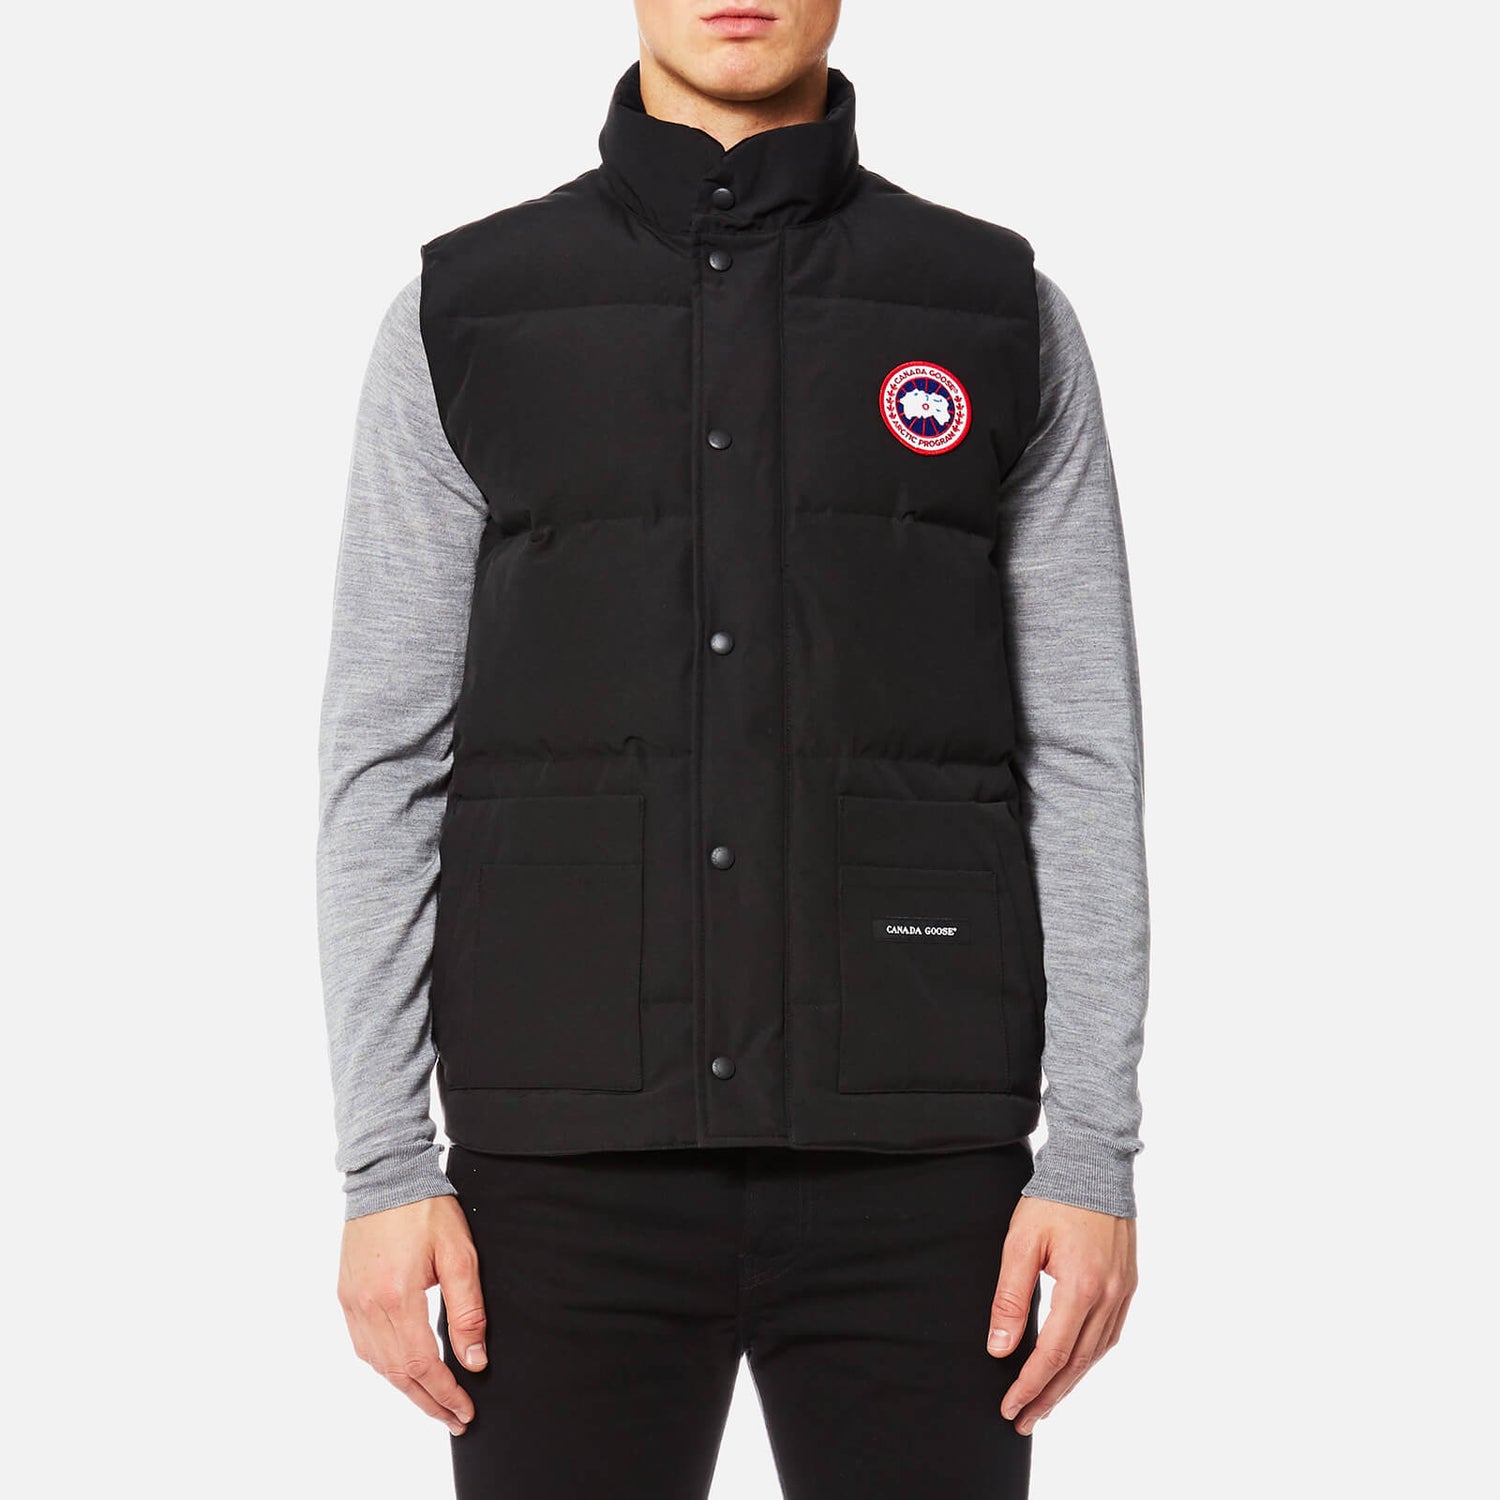 Canada Goose Men's Freestyle Crew Vest - Black - Free UK Delivery Available